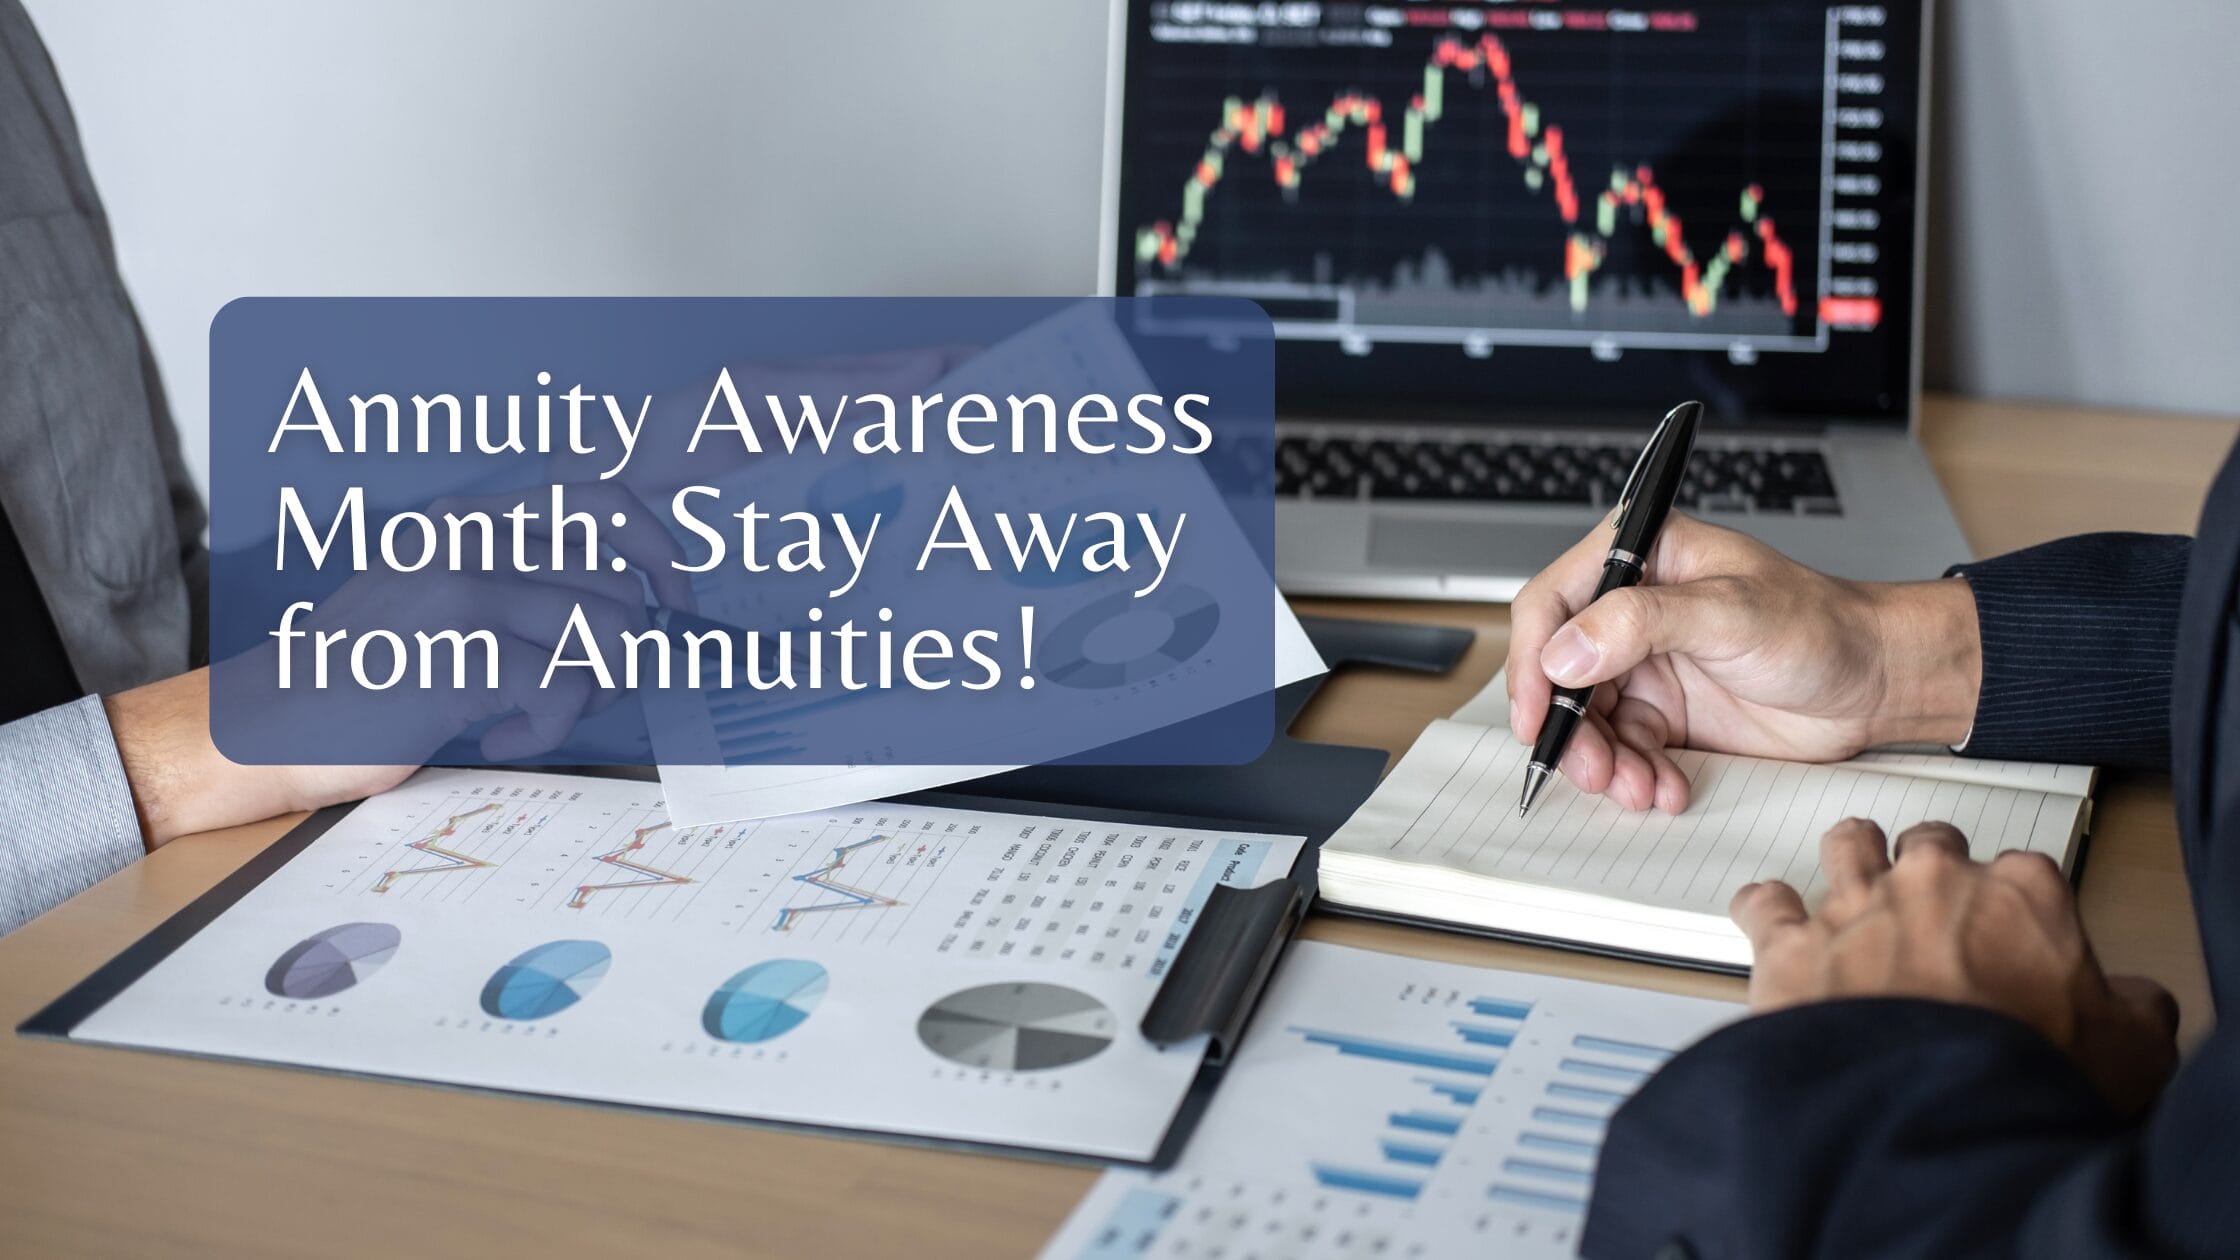 Annuity Awareness Month: Stay Away from Annuities!